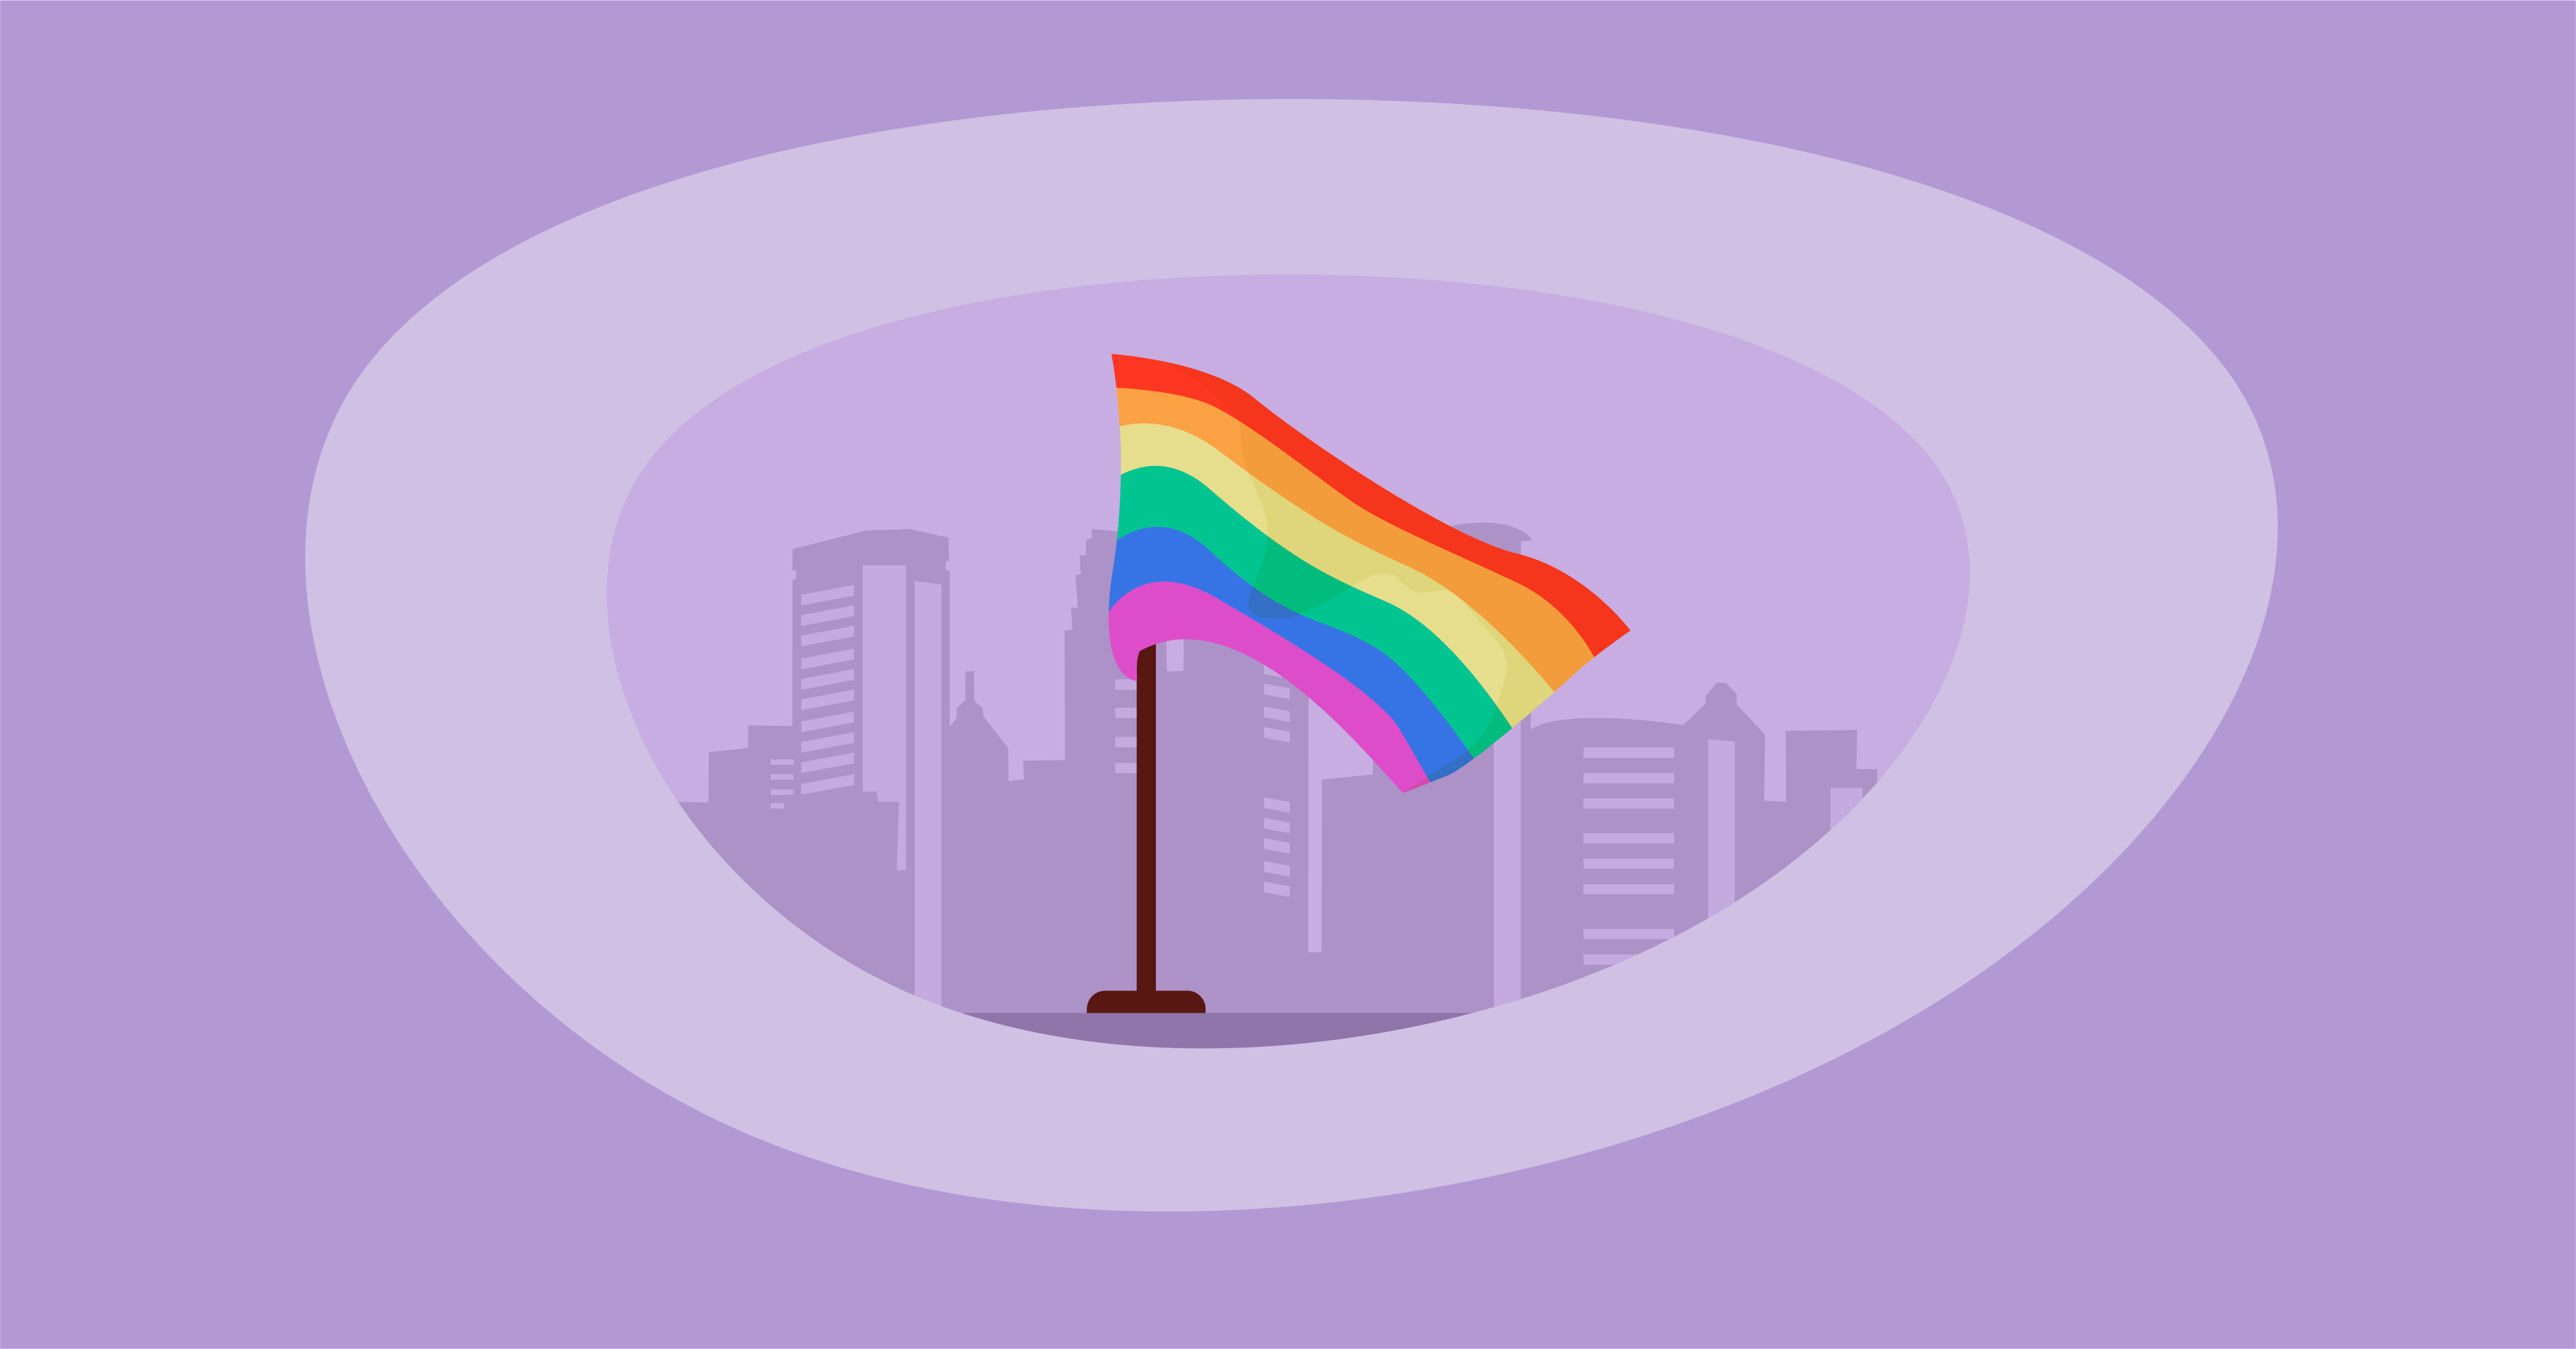 Attempted illustration of a flag to represent the LGBTQ+ community